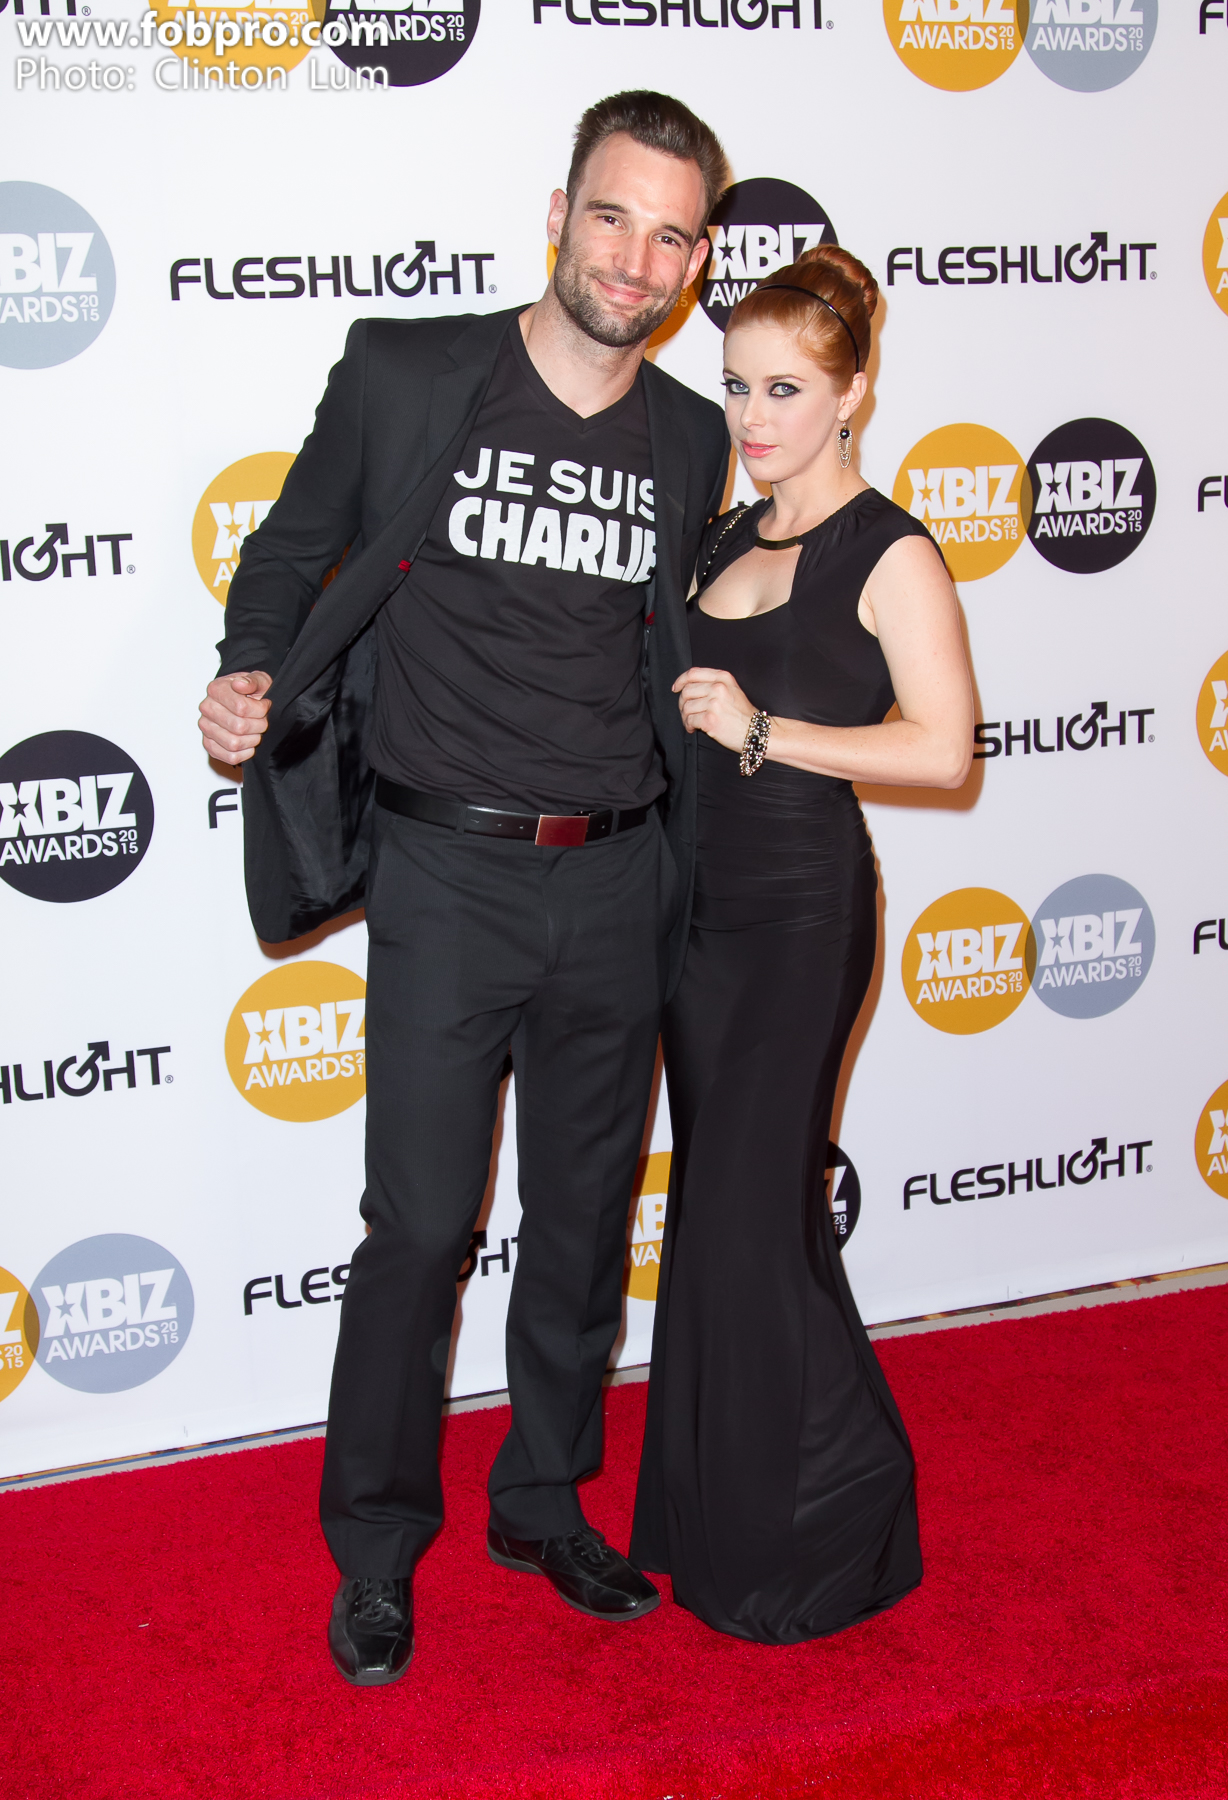 Xbiz Awards 2015 Page 12 Of 18 Fob Productions 